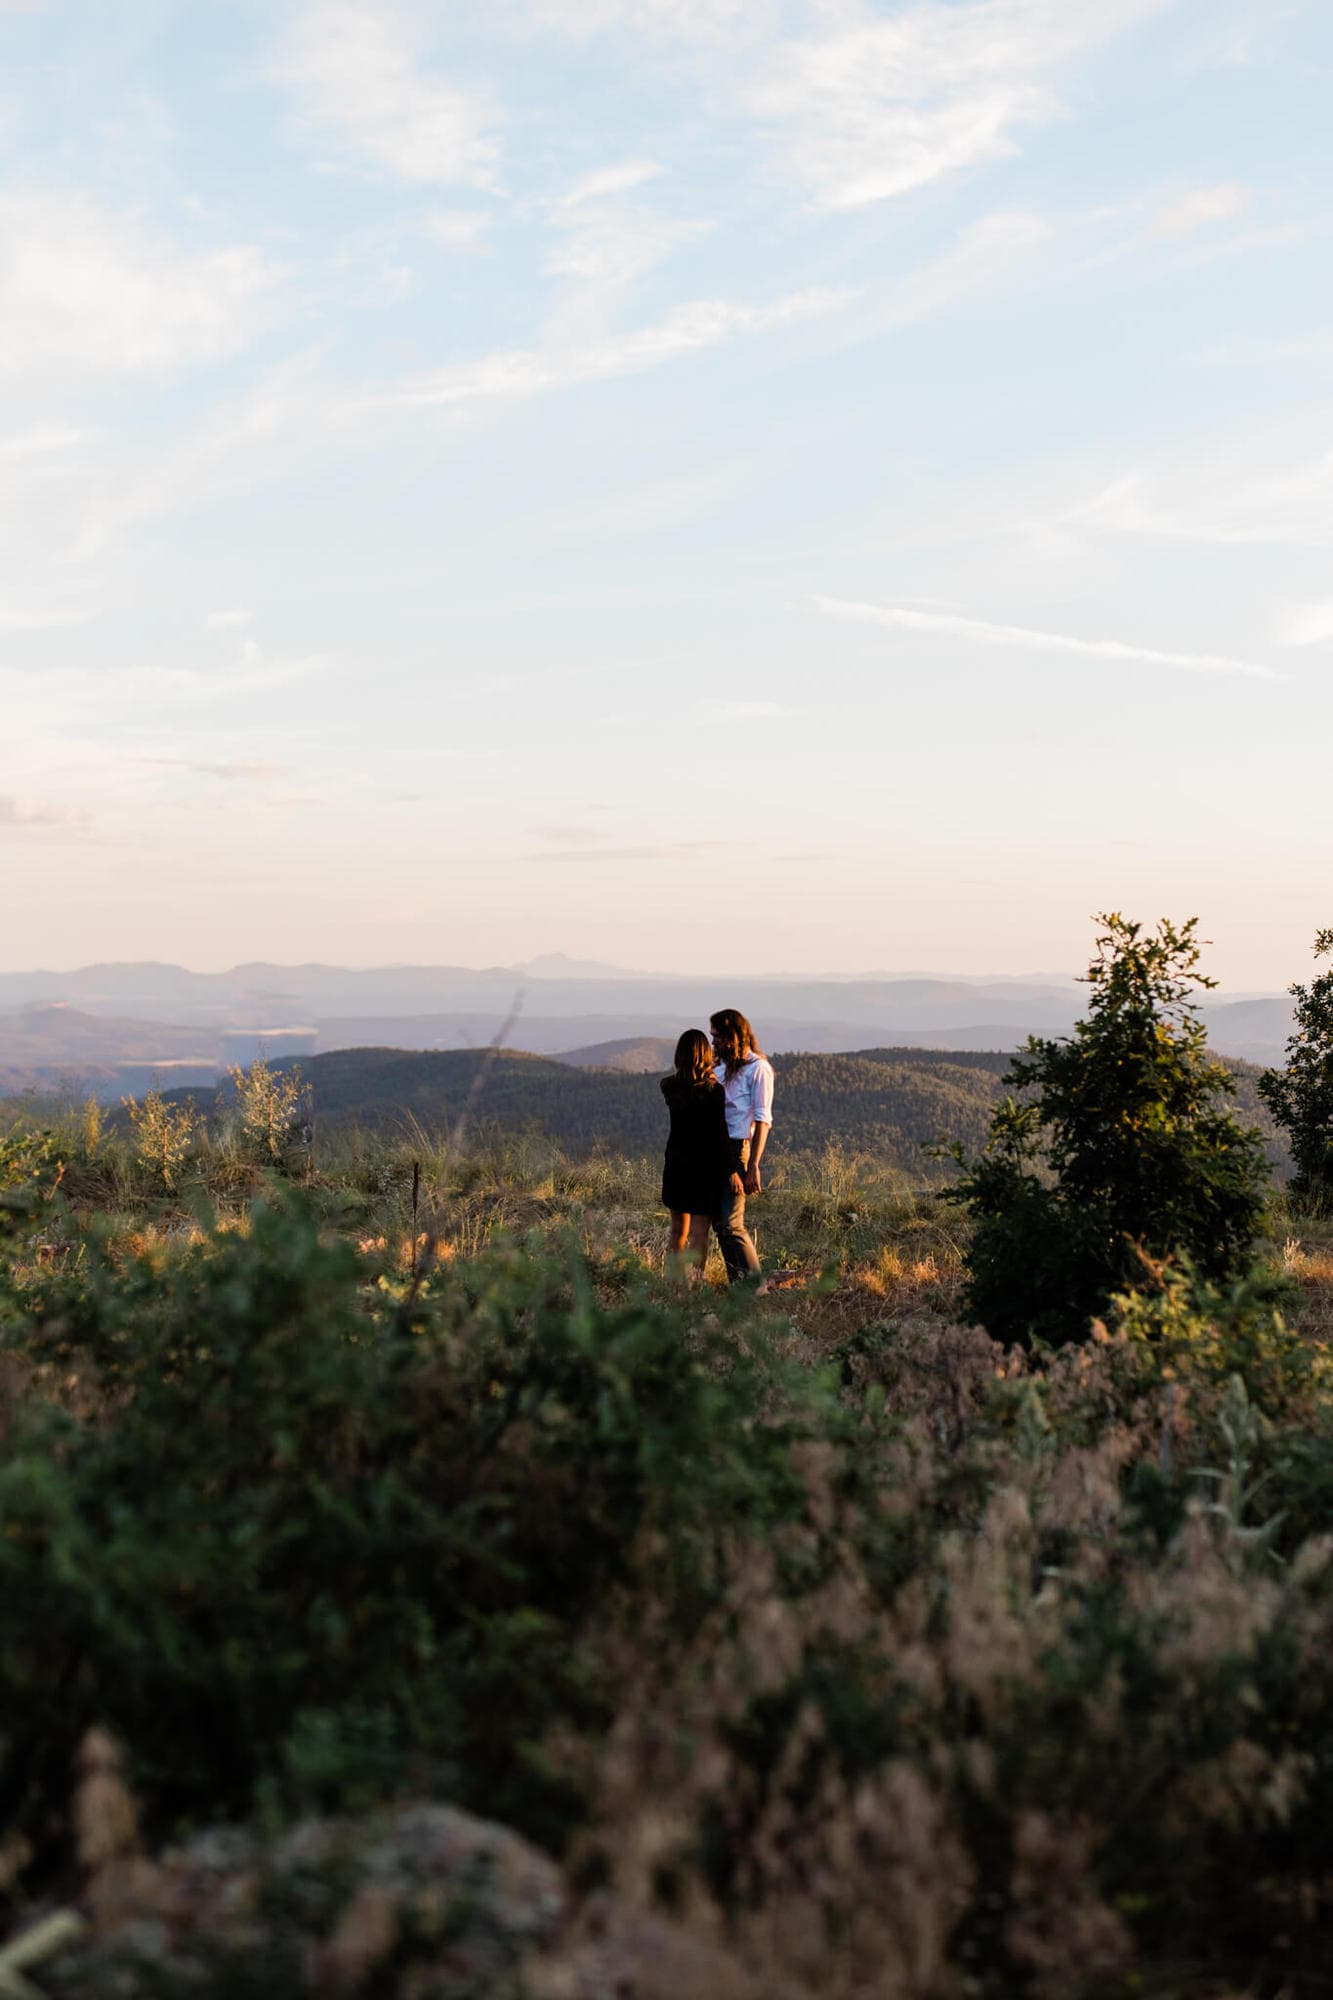 Leah and David had their forest engagement photos at the Mogollon Rim and it is the perfect spot for adventure and forest vibes.